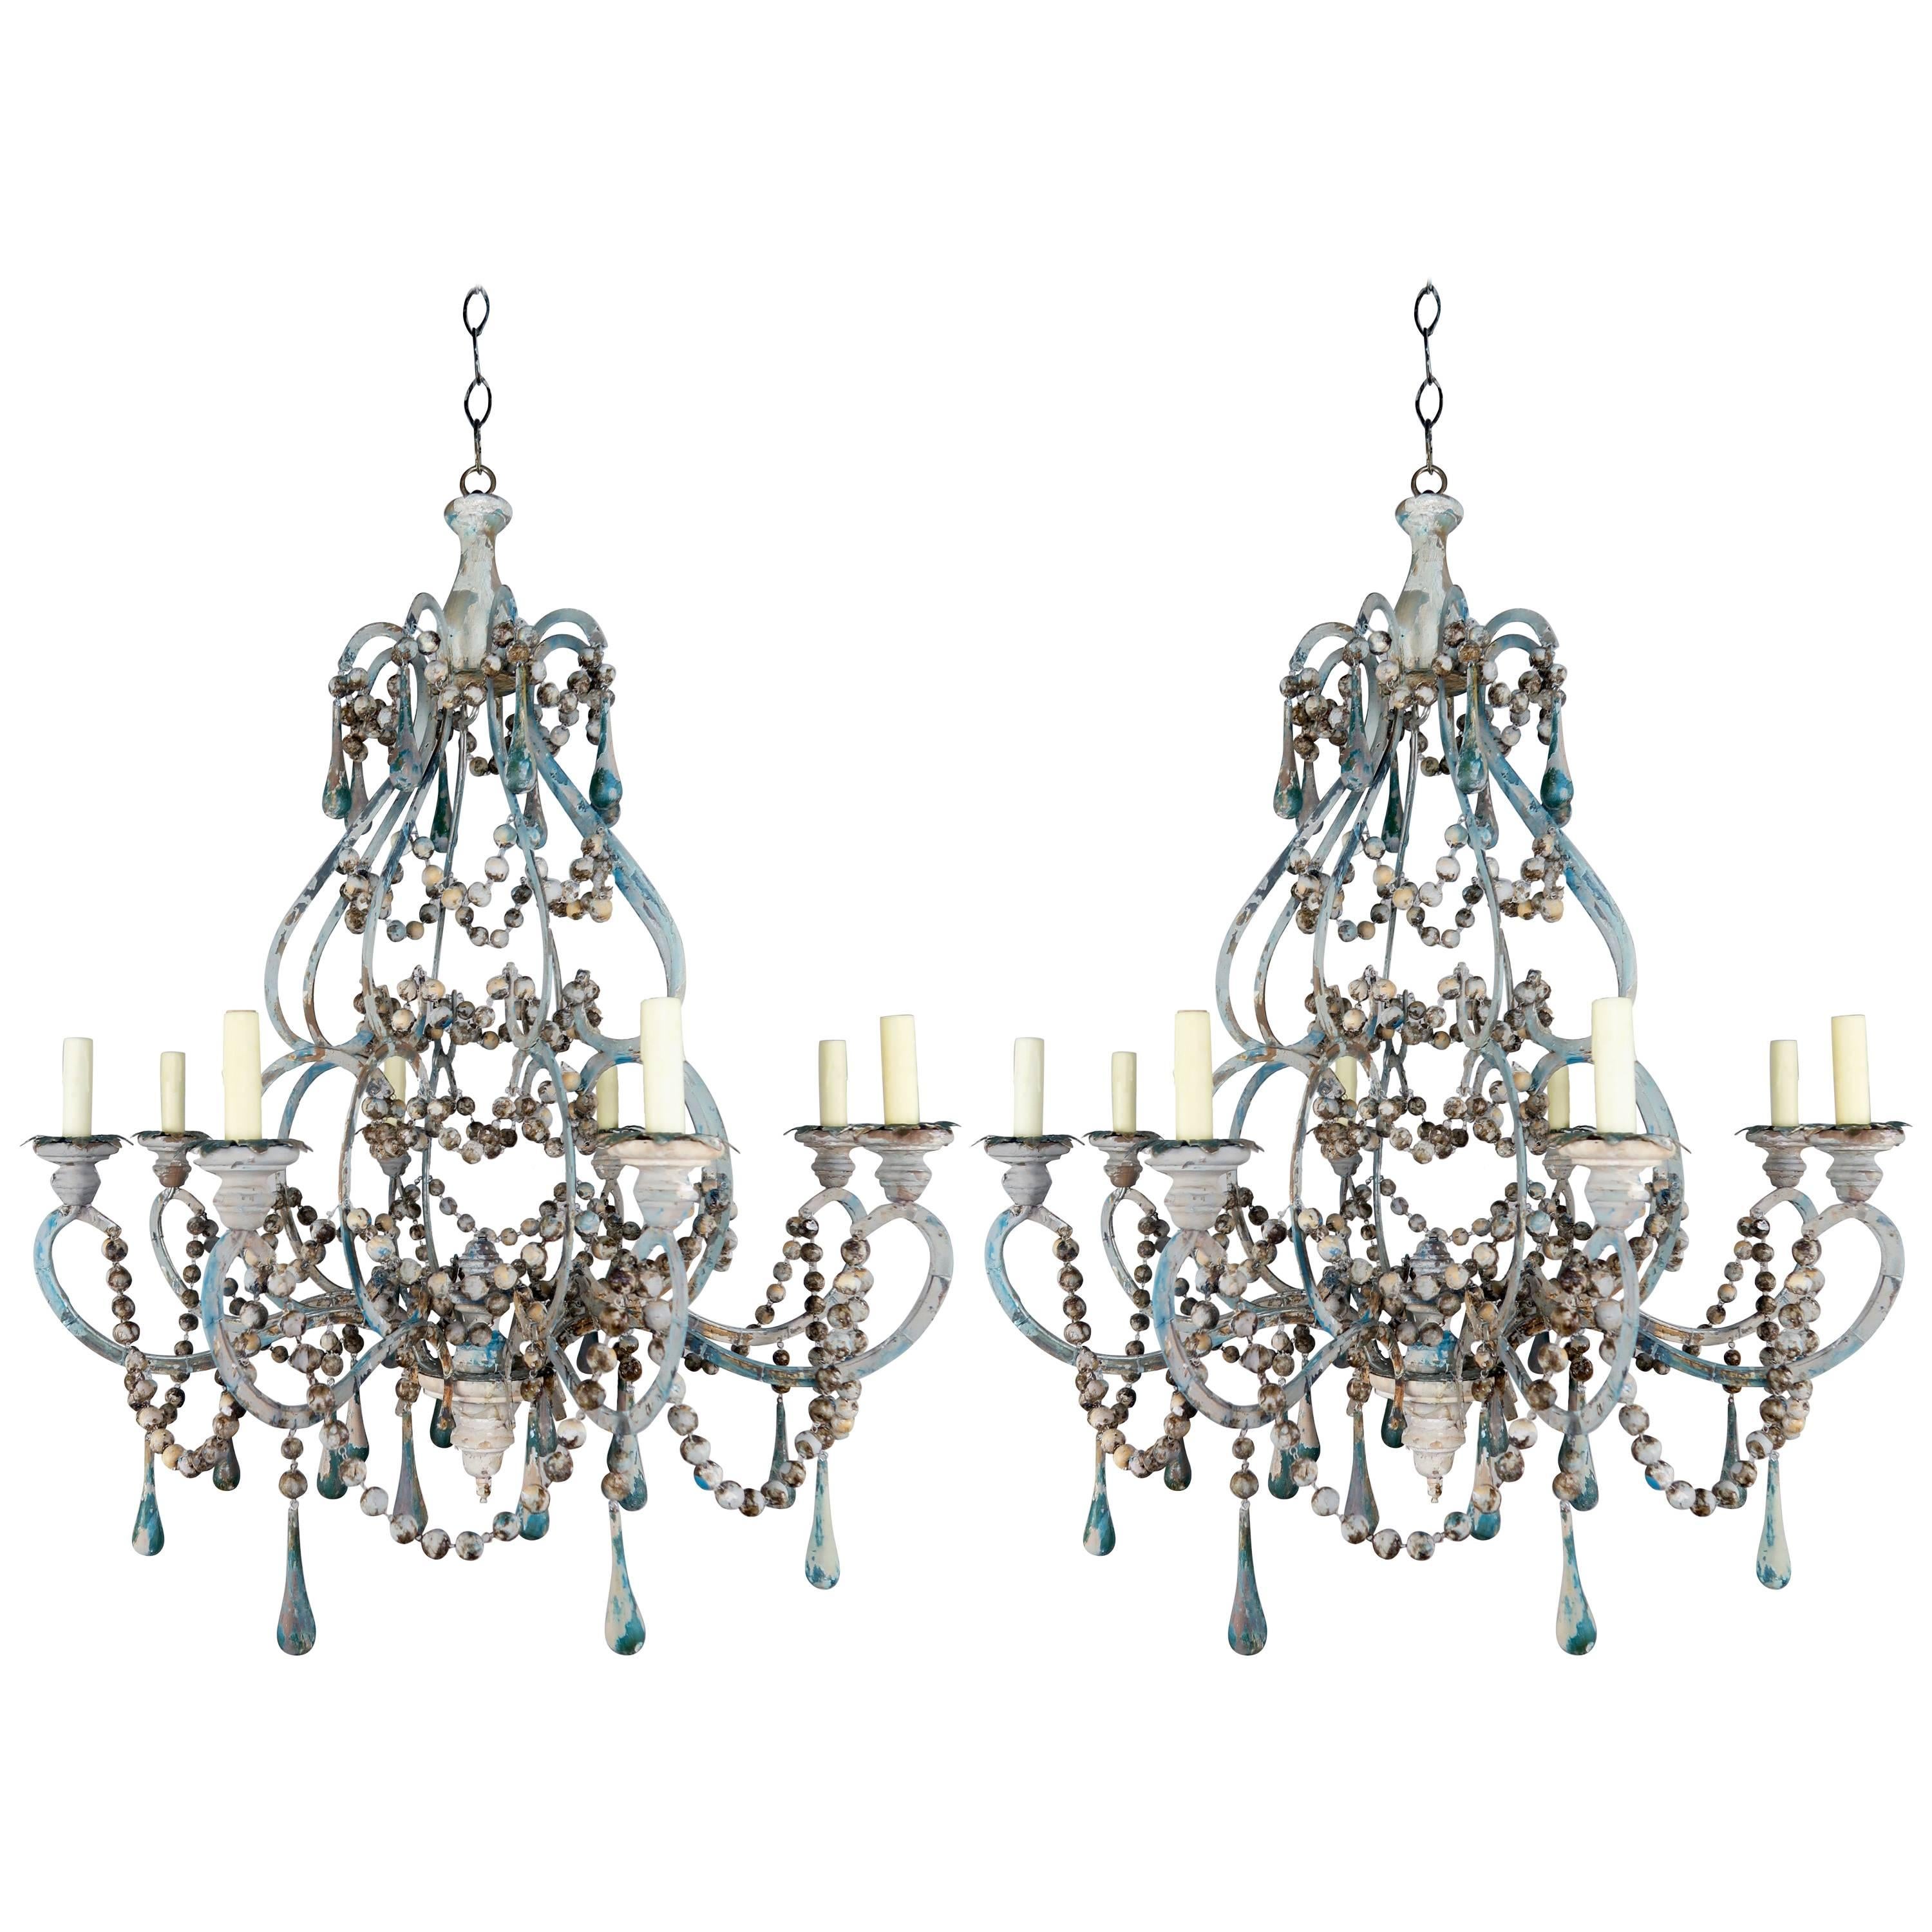 Pair of Eight-Light Wood Beaded and Metal Painted Chandeliers